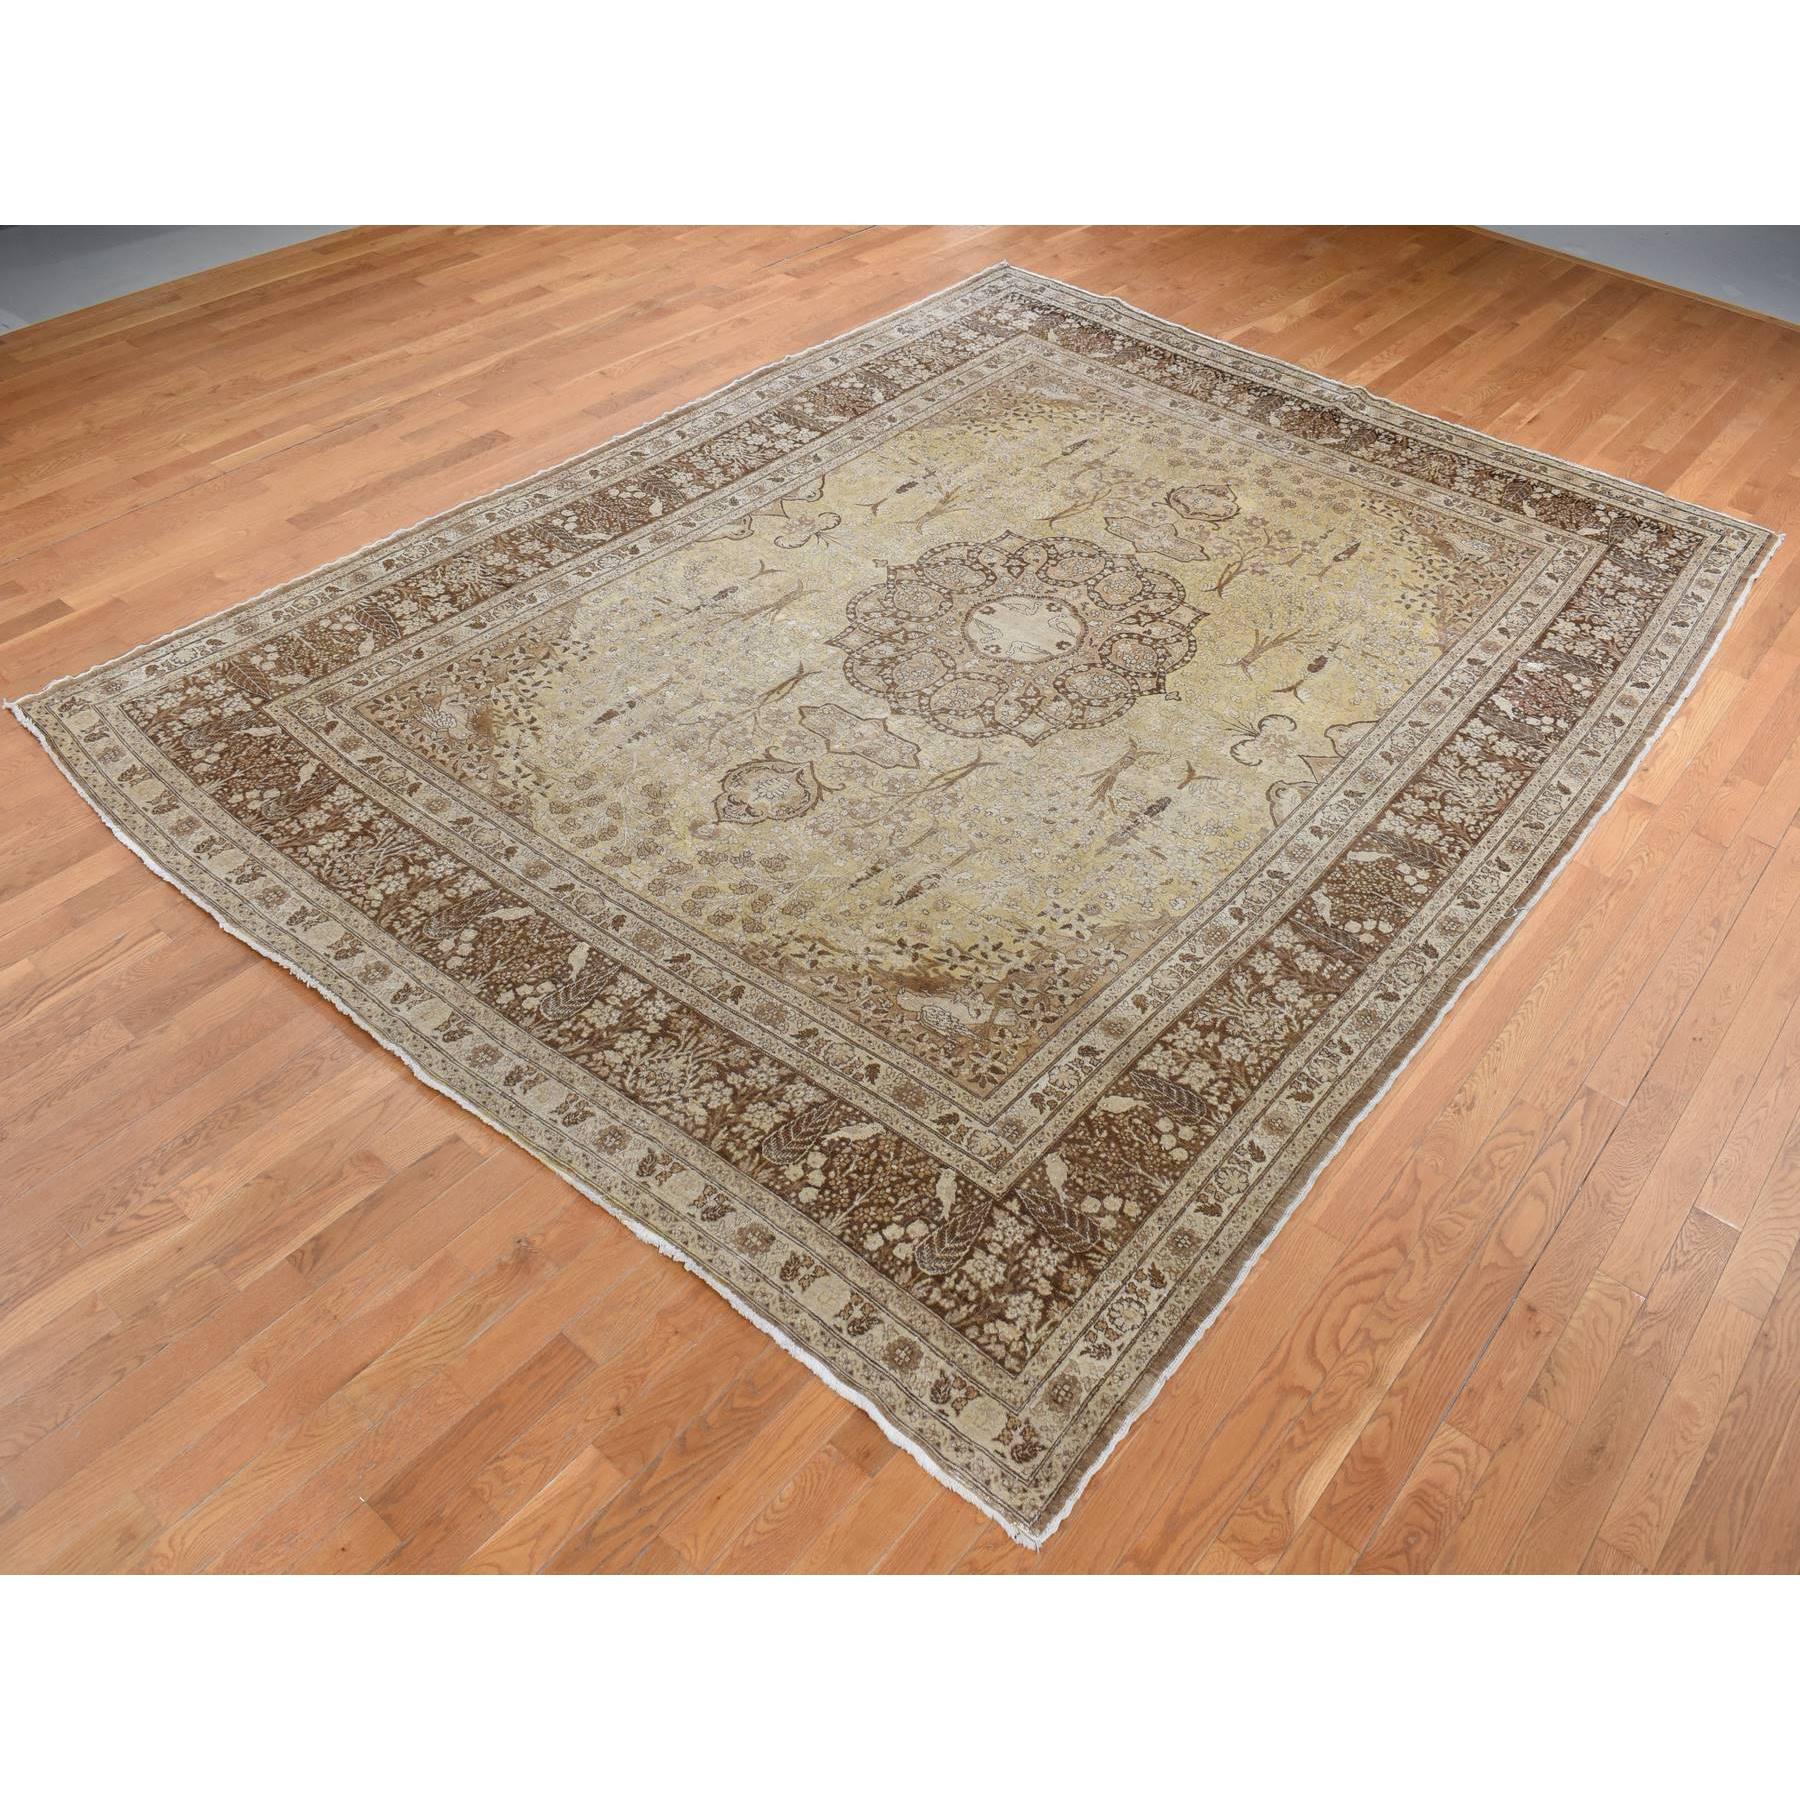 Brown Antique Persian Tabriz Birds and Trees Design Pure Wool Hand Knotted Rug (Persisch) im Angebot